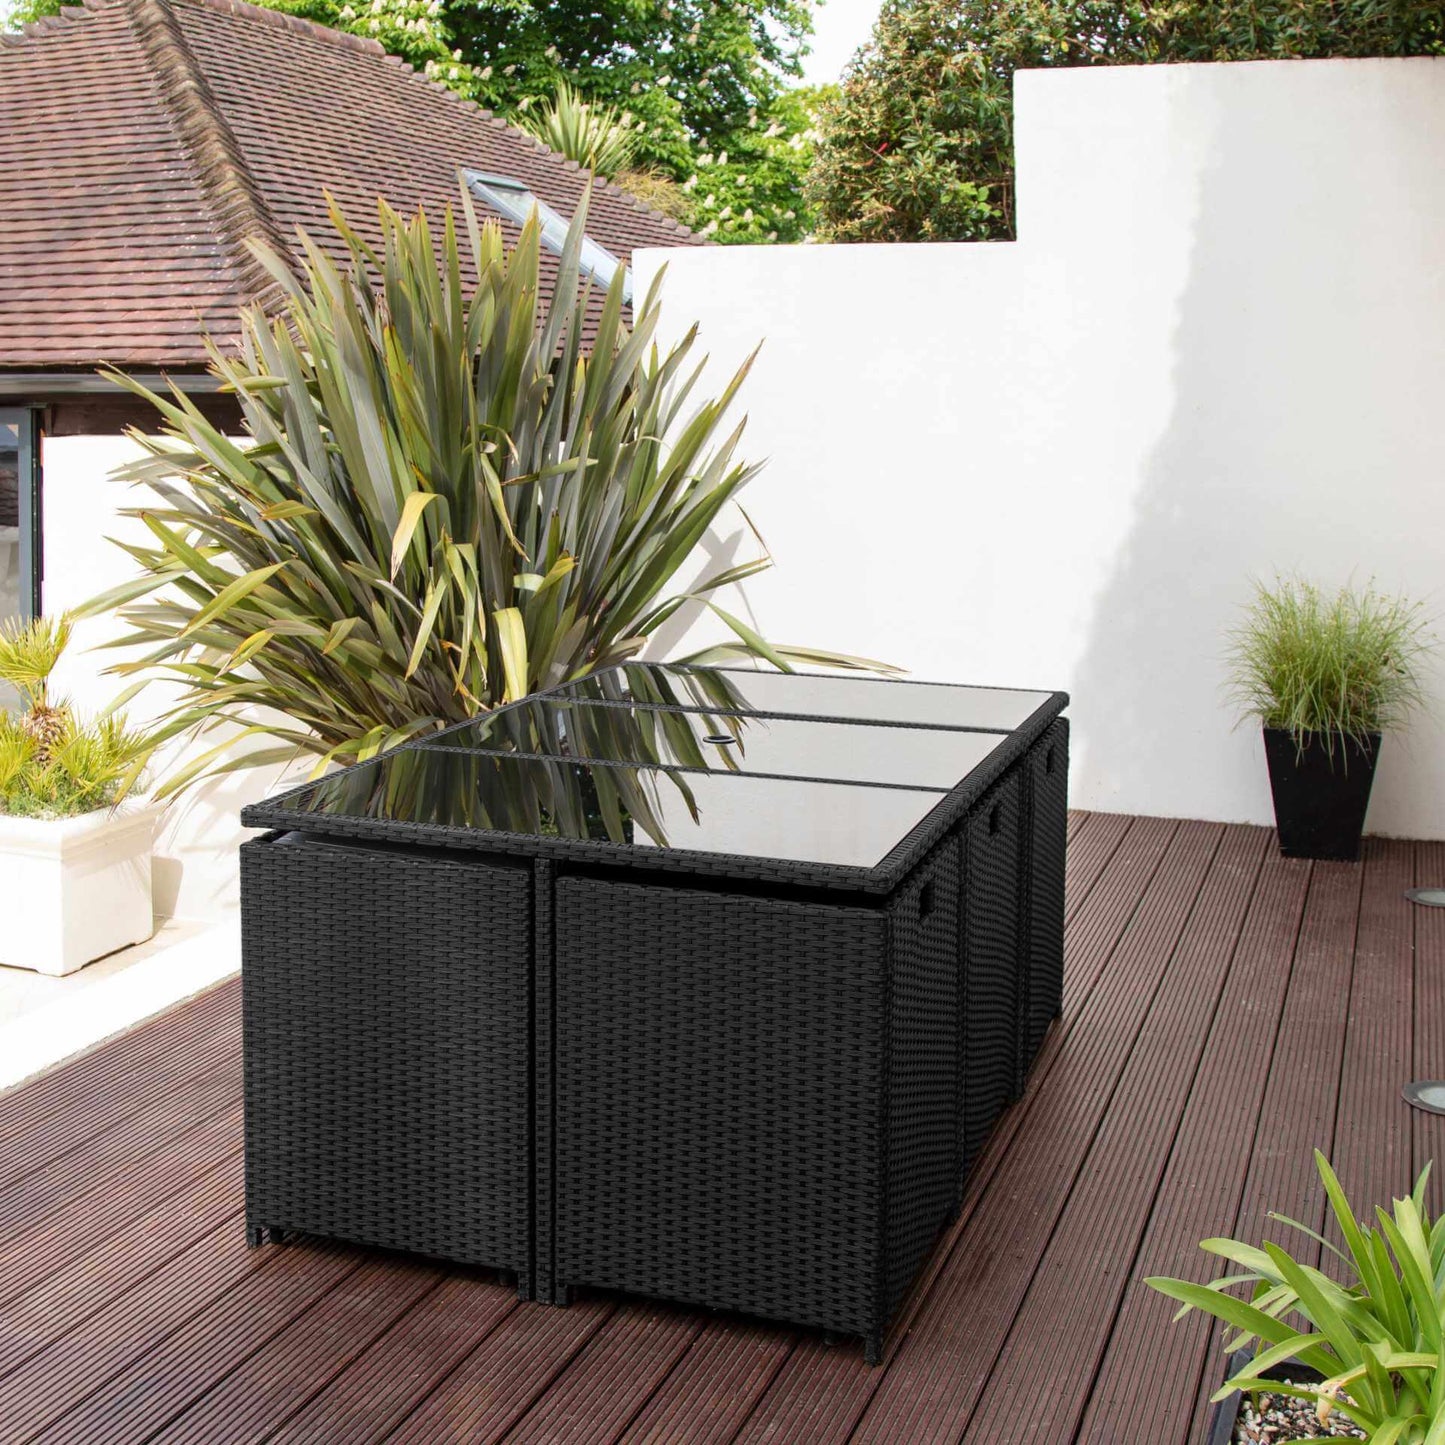 10 Seater Rattan Cube Outdoor Dining Set - Black Weave - 2023